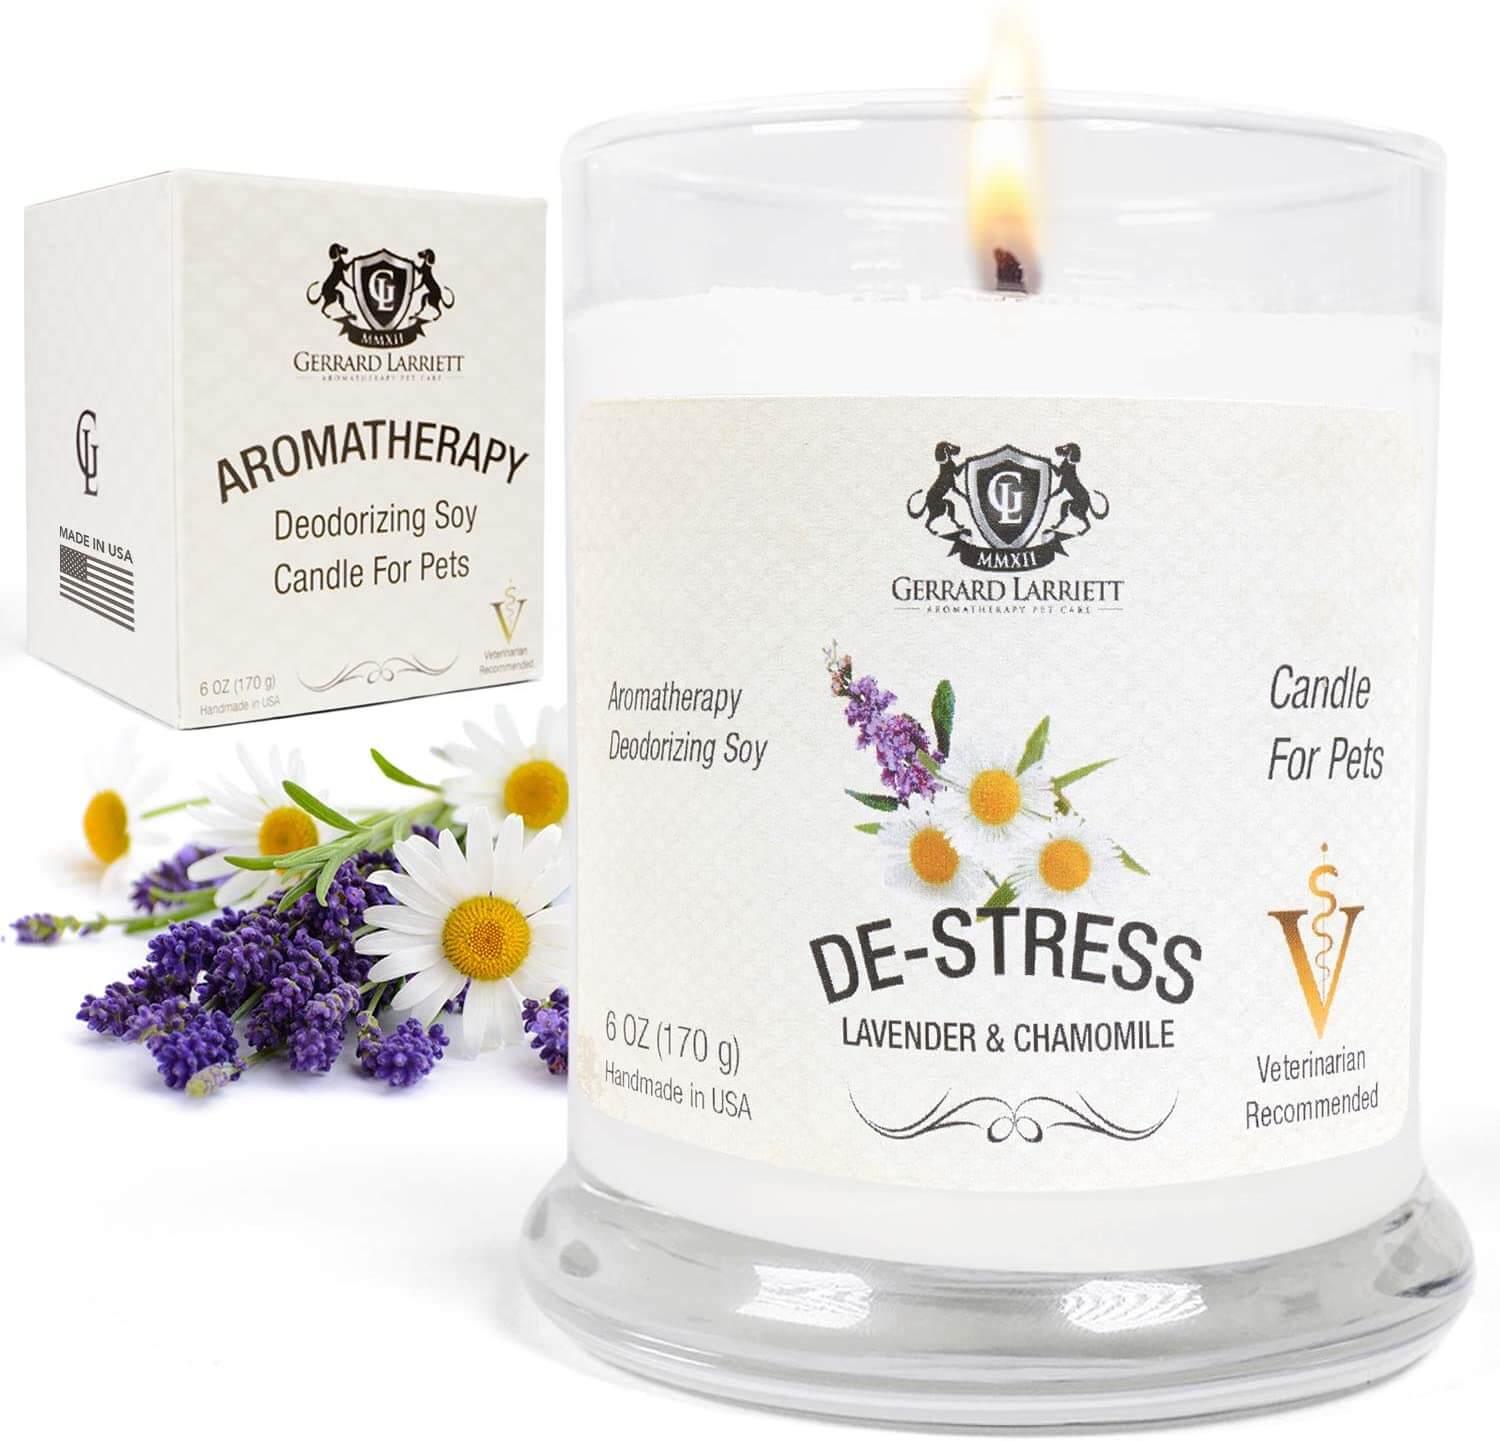 Lavender & Chamomile Aromatherapy Deodorizing Soy Candle For Pets